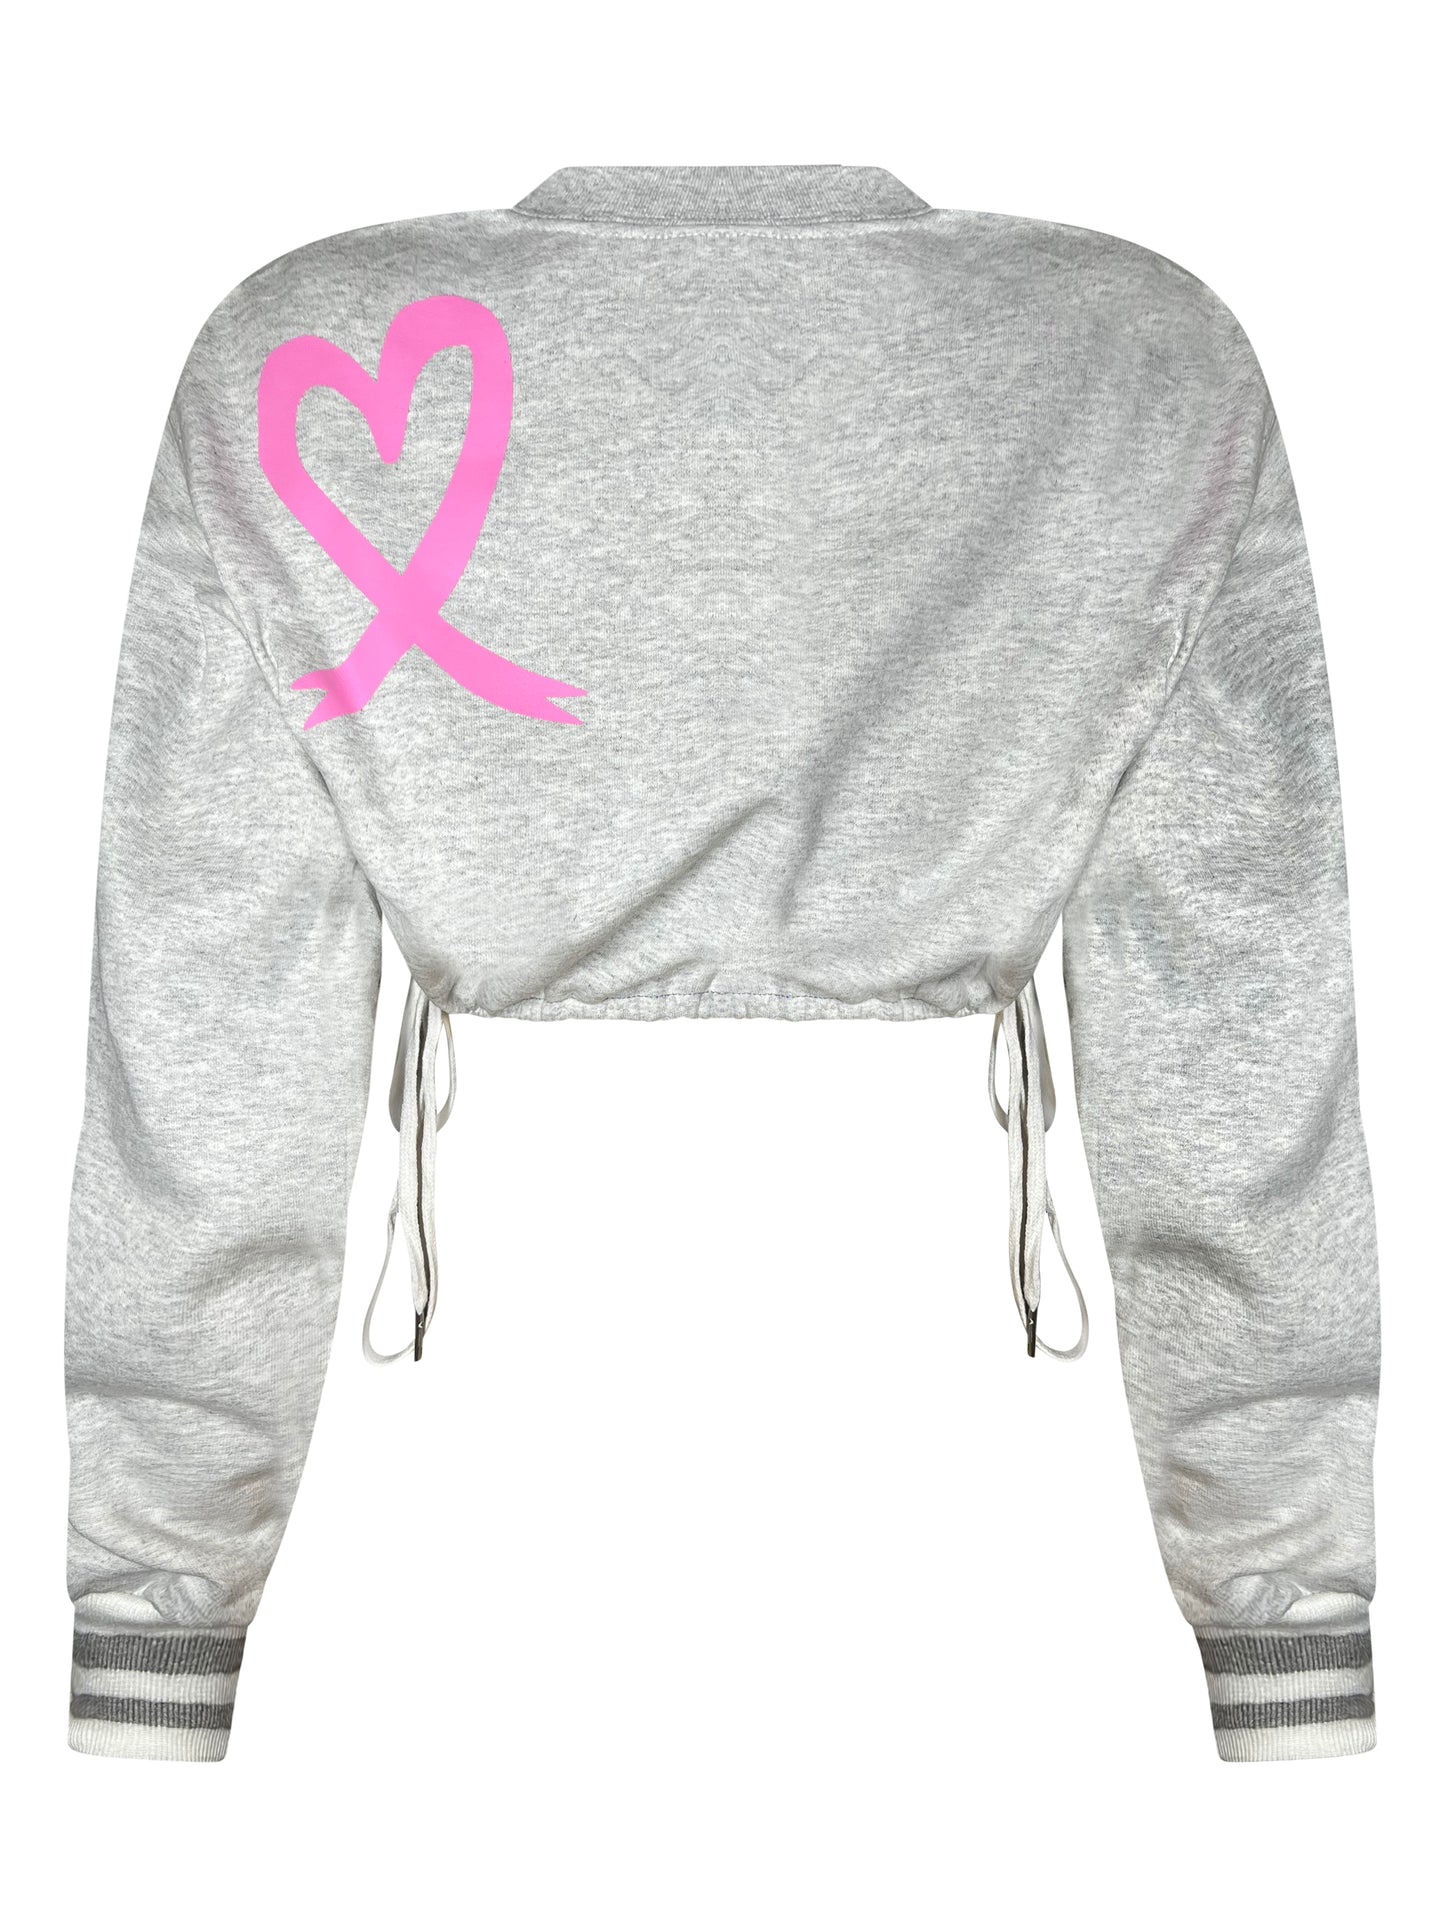 ASH CROPPED CREWNECK SIGNATURE PULLOVER - BREAST CANCER AWARENESS (LIMITED EDITION)